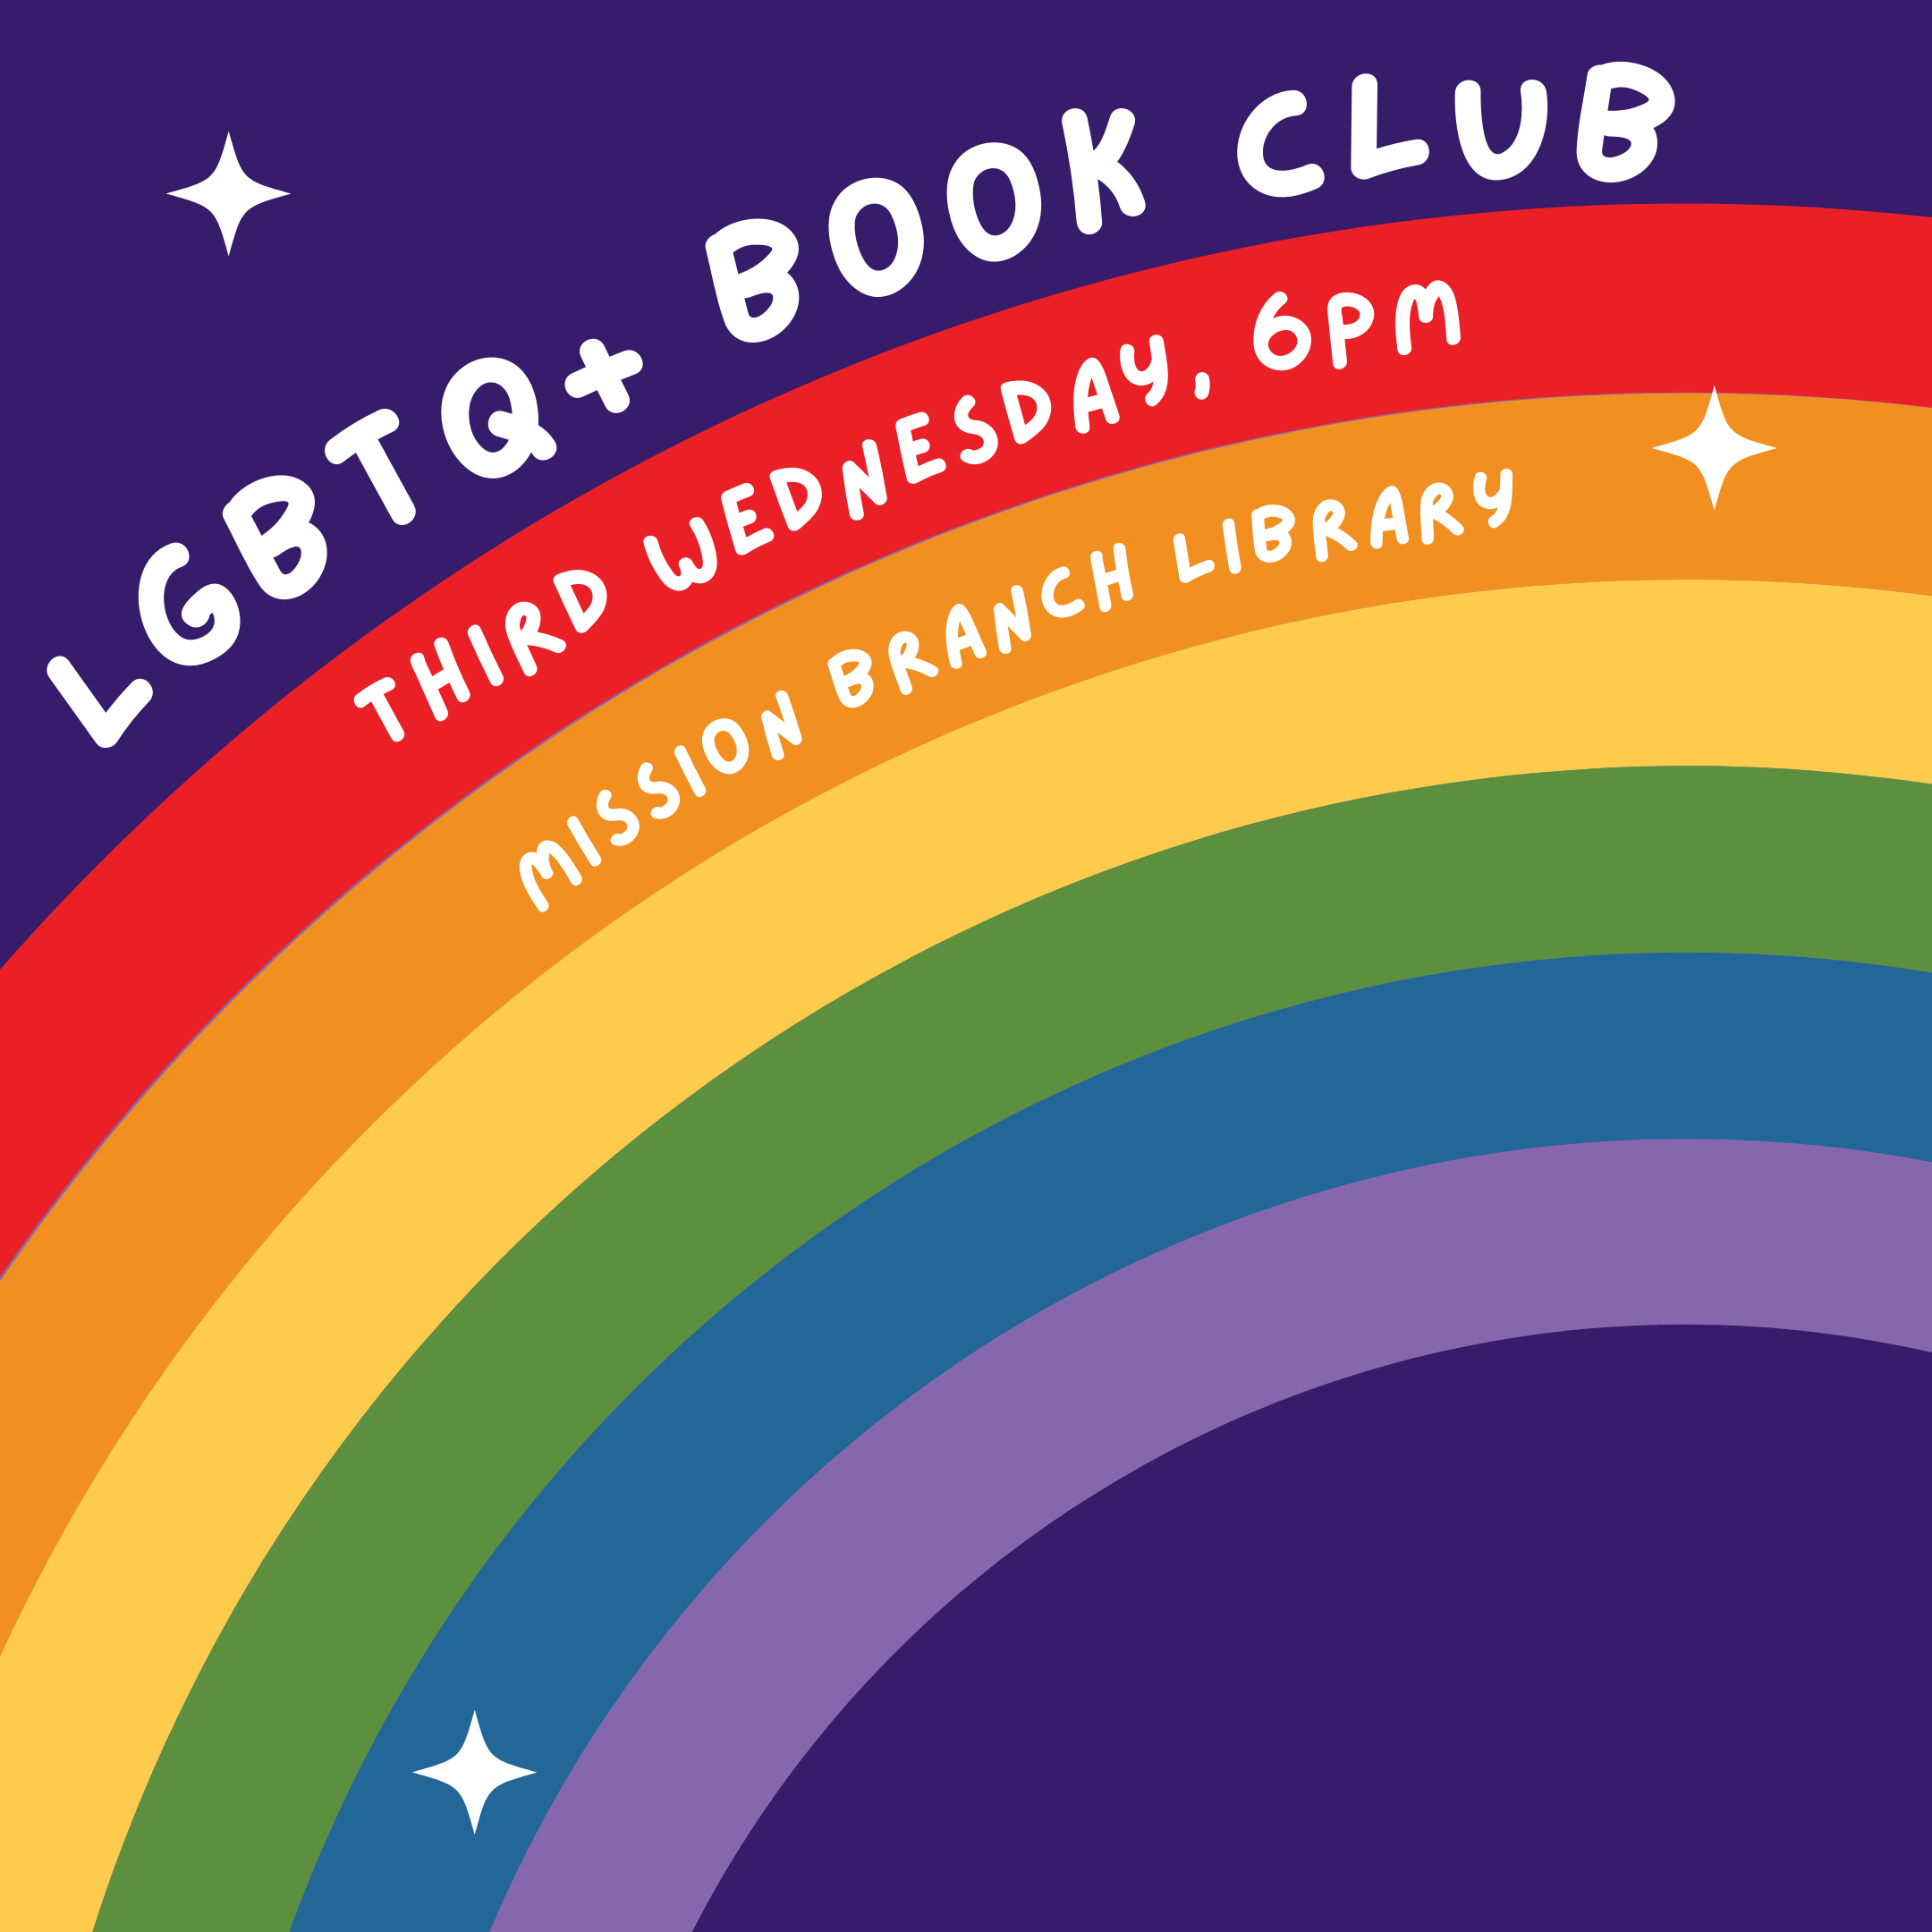 purple square with rainbow graphic, red orange yellow green and purple text reads LGBTQ+ Book Club third Wednesday 6 pm Mission Branch Library